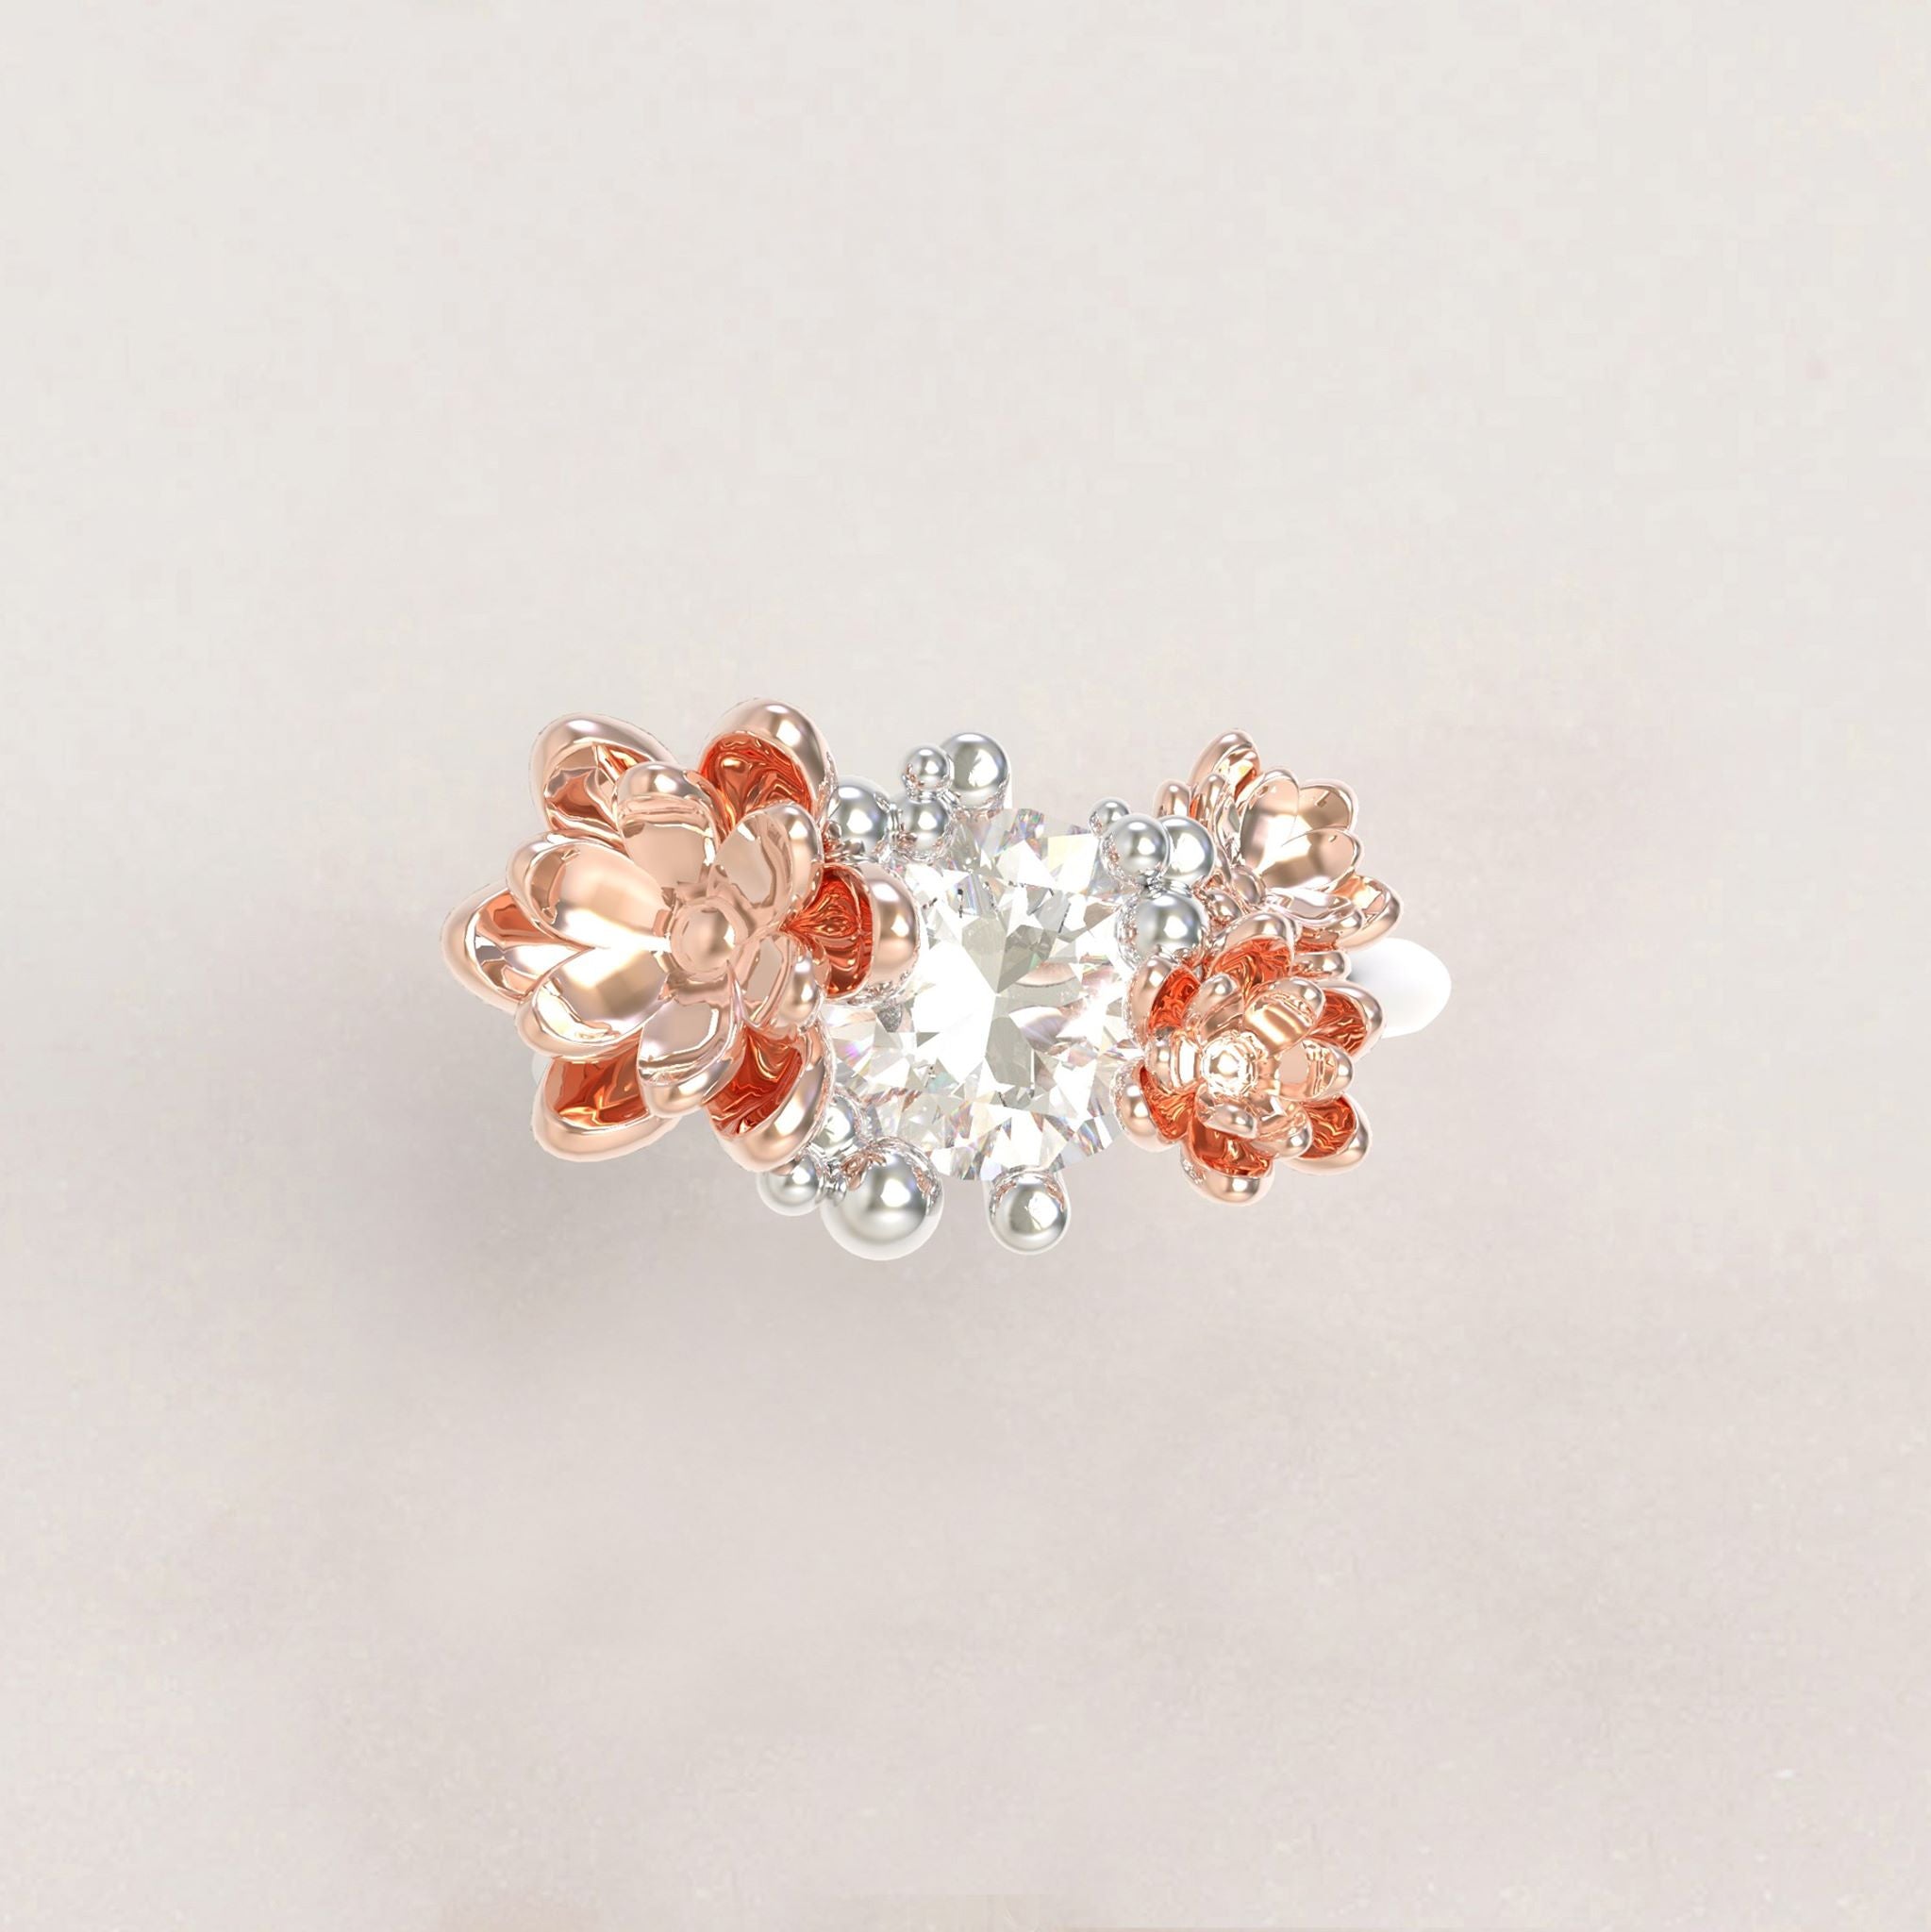 Two-toned Flowers Engagement Ring No.14 in White Gold Band/Rose Gold Flowers - Moissanite/Diamond